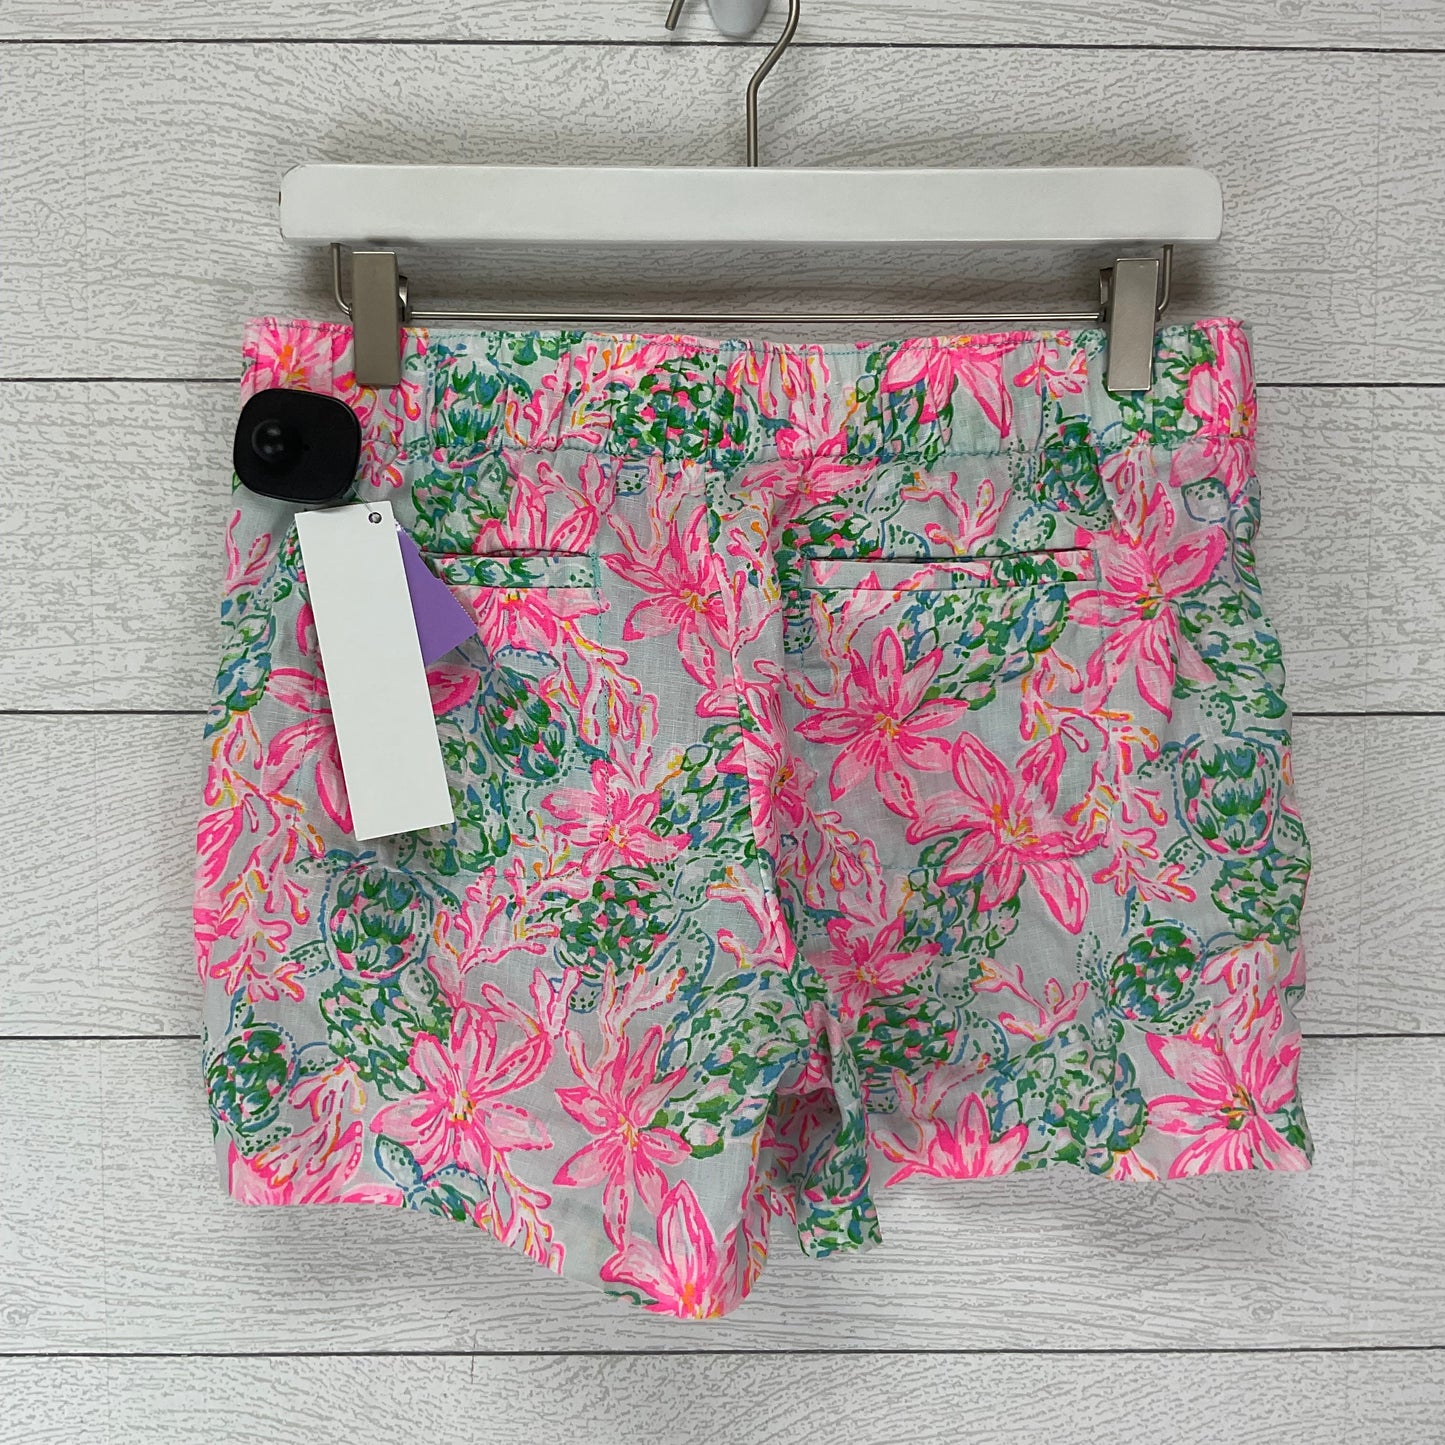 Floral Print Shorts Designer Lilly Pulitzer, Size S